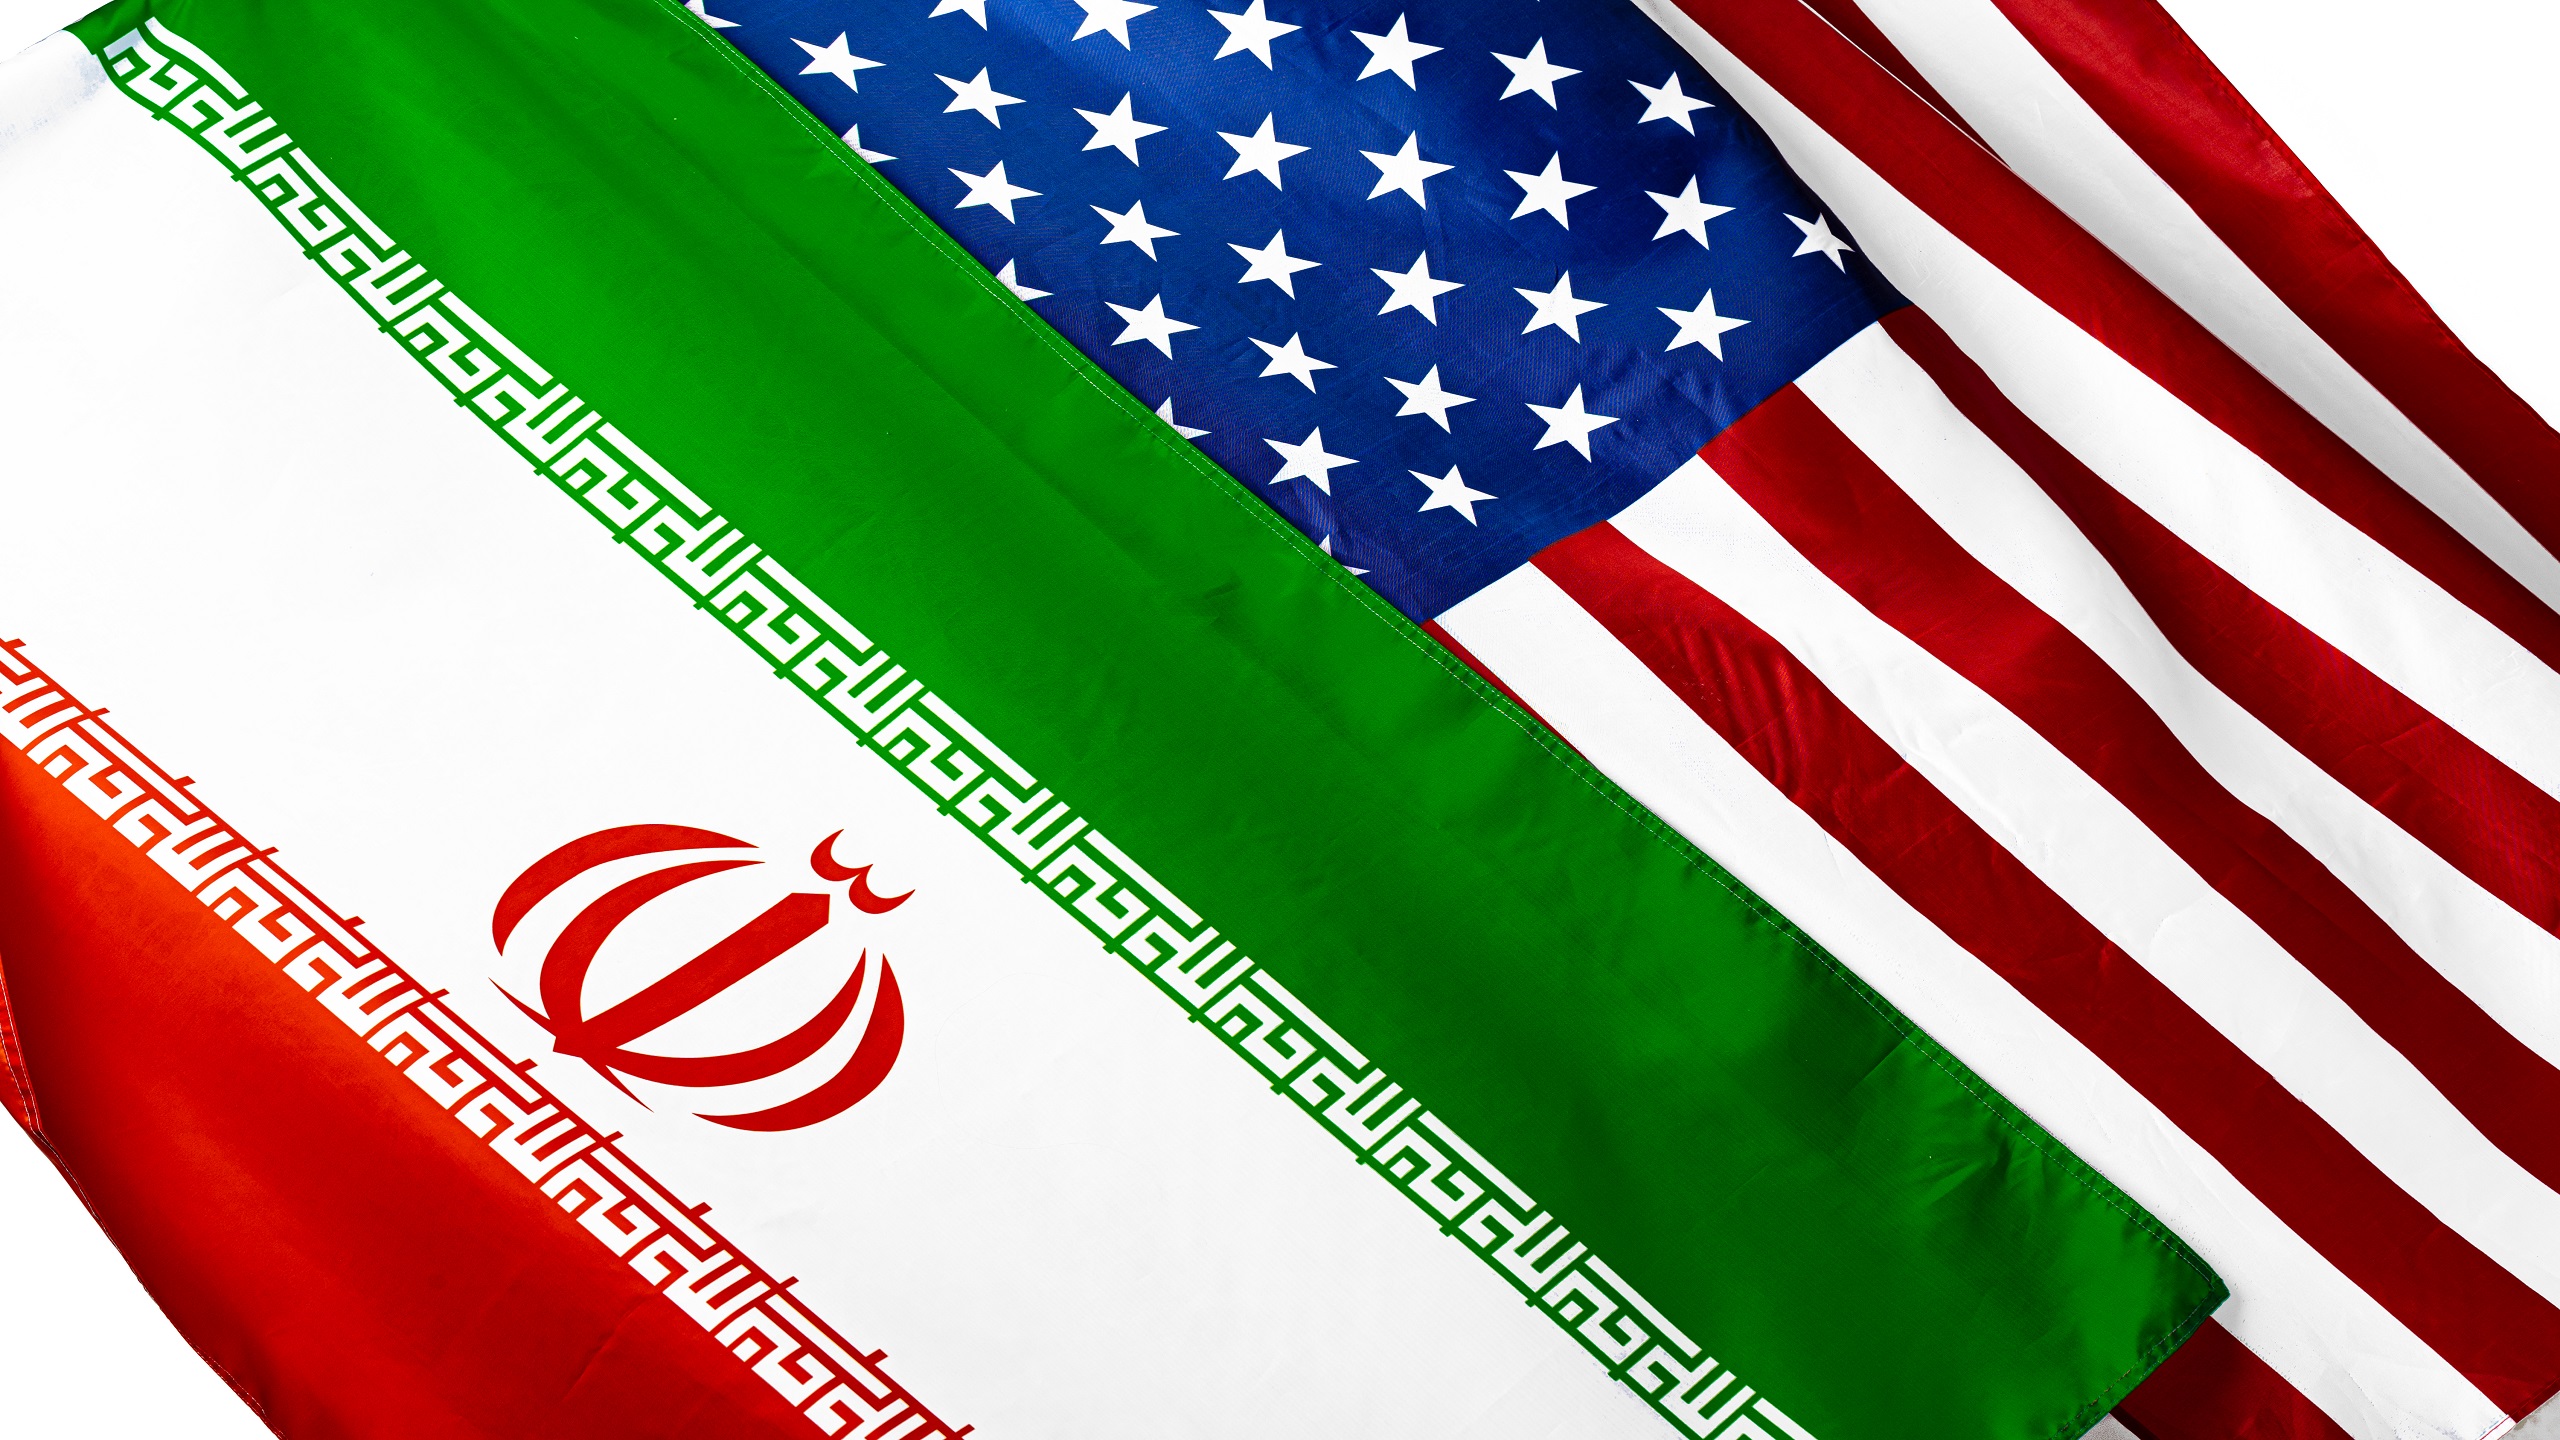 Iran, US to Hold Indirect Talks on Nuclear Deal